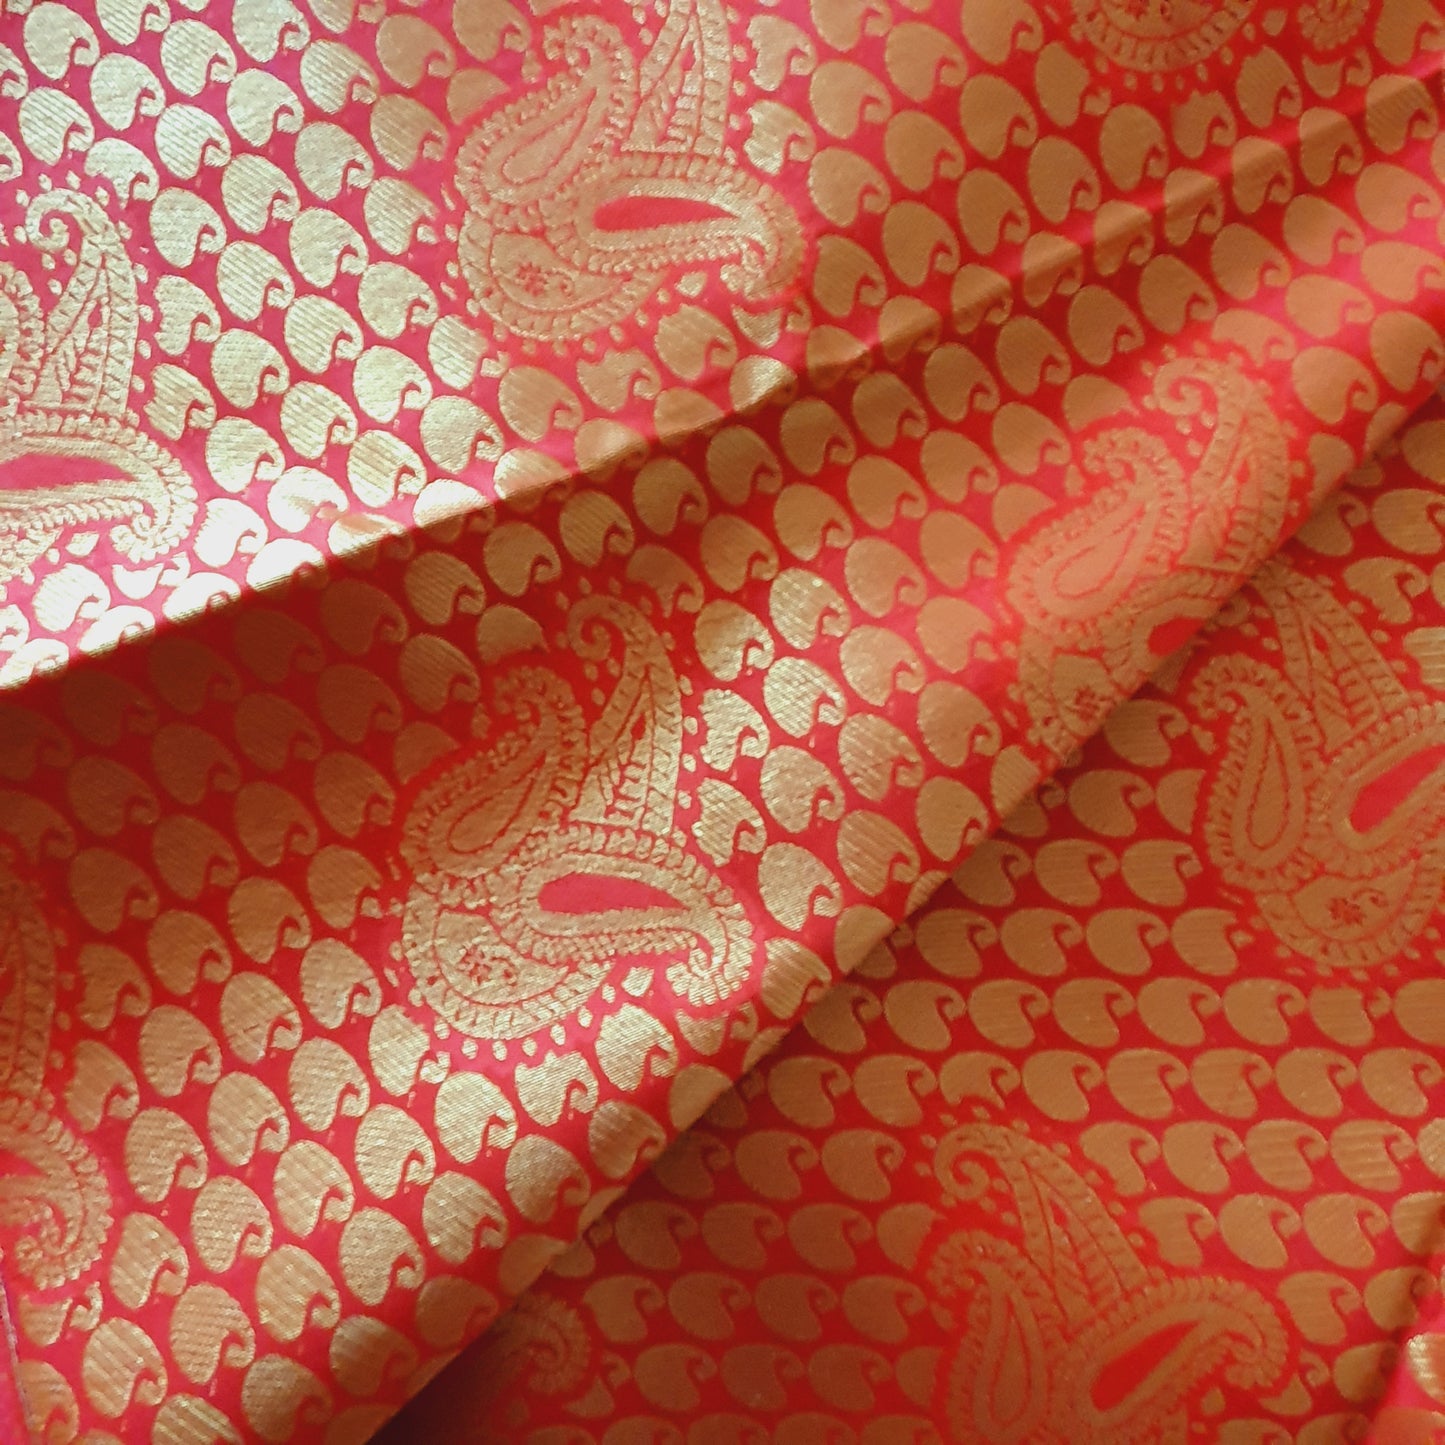 ORANGE RED KANCHIPURAM WITH HEAVY EMBROIDERY